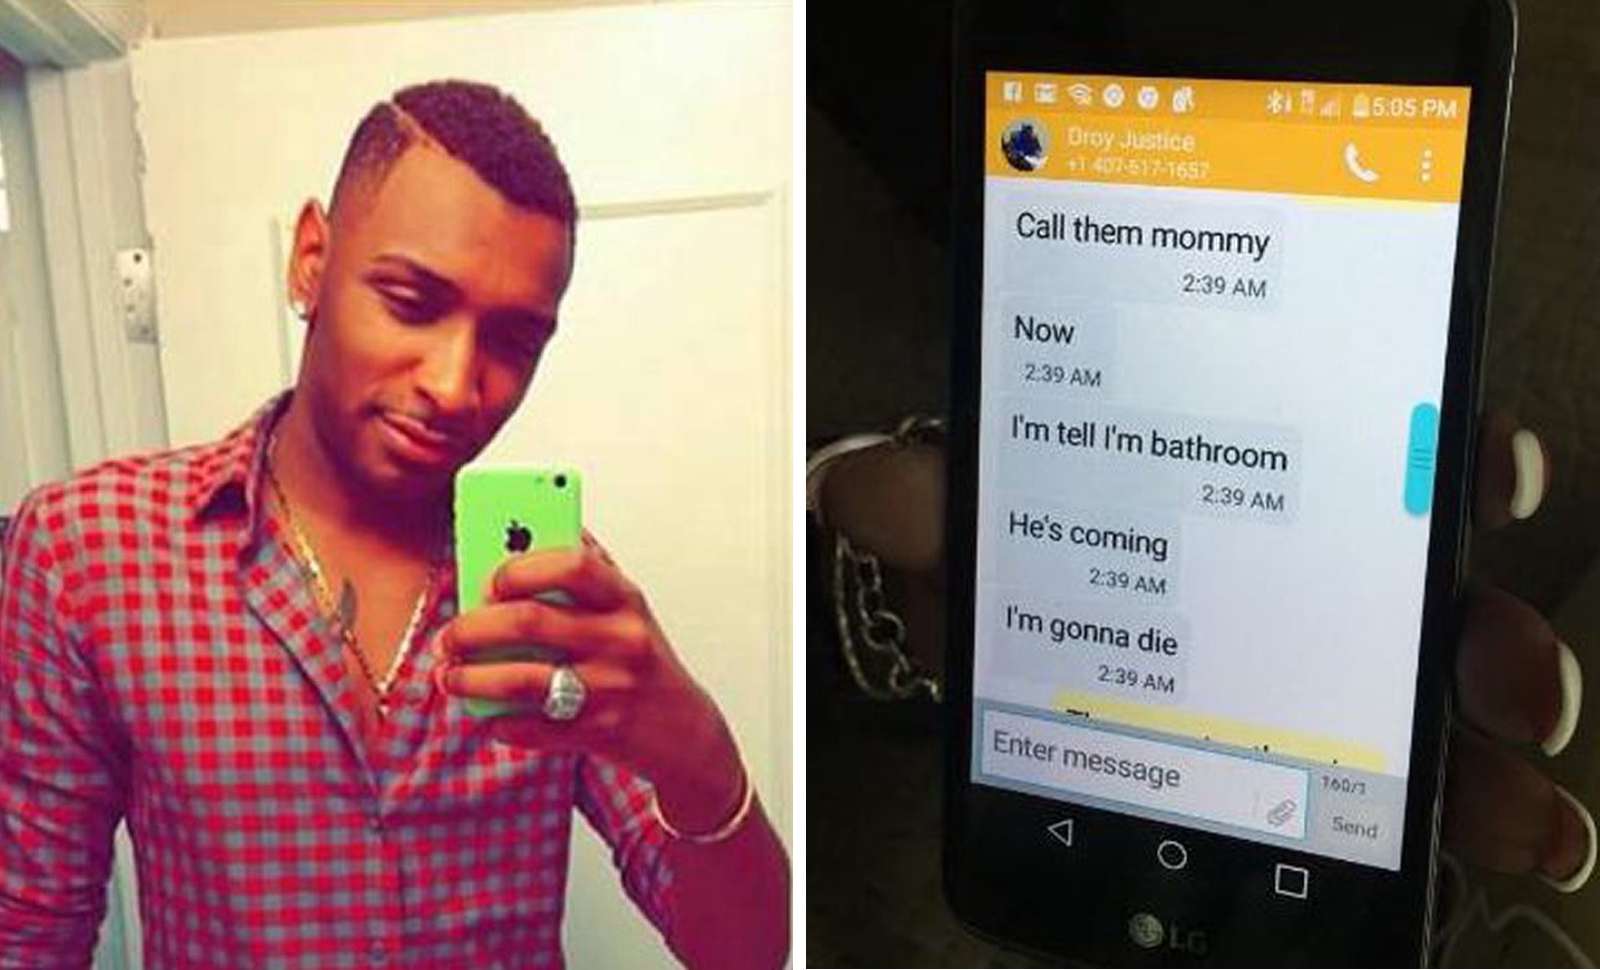 Eddie Justice exchanged a tragic series of text messages with his mother, Mina Justice, as a gunman rampaged through Pulse nightclub in Orlando, Florida. Photos: Facebook and AP